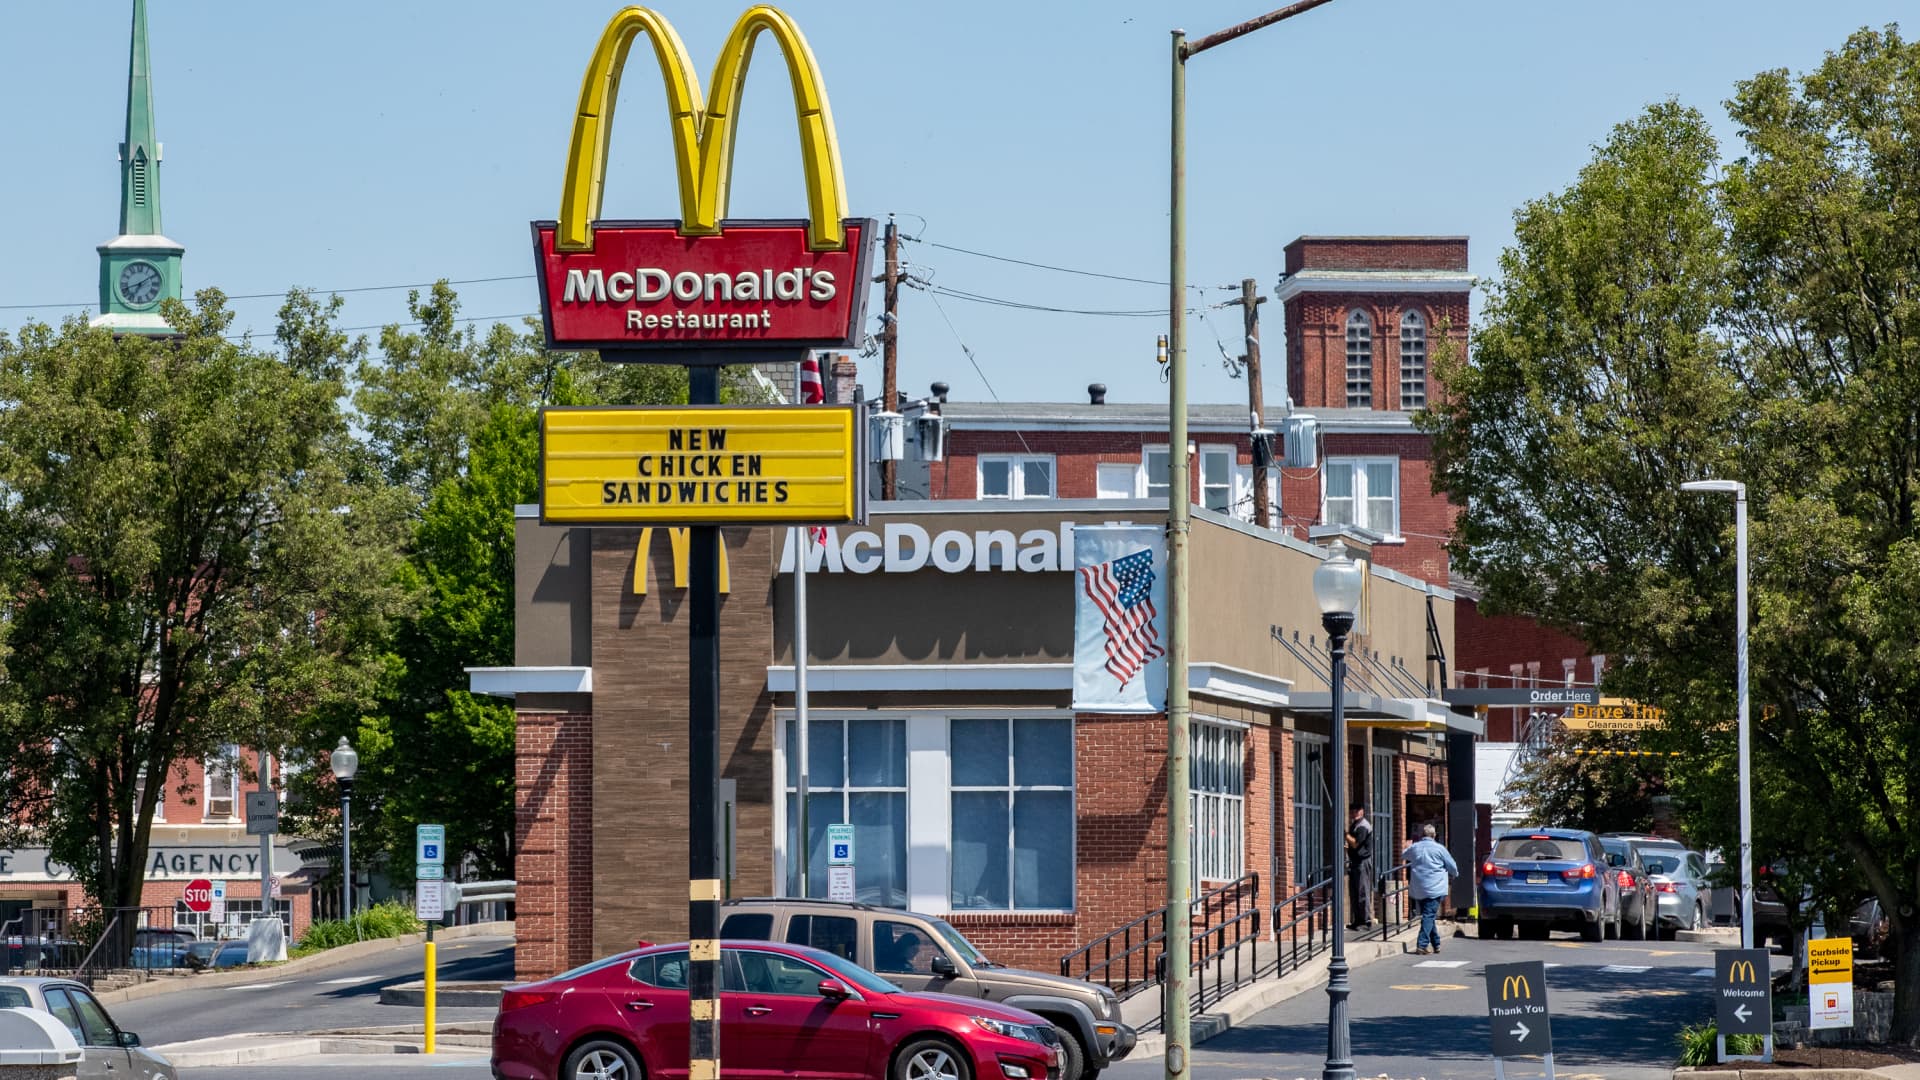 McDonald’s to raise royalty fees for new franchised restaurants for first time in nearly 30 years